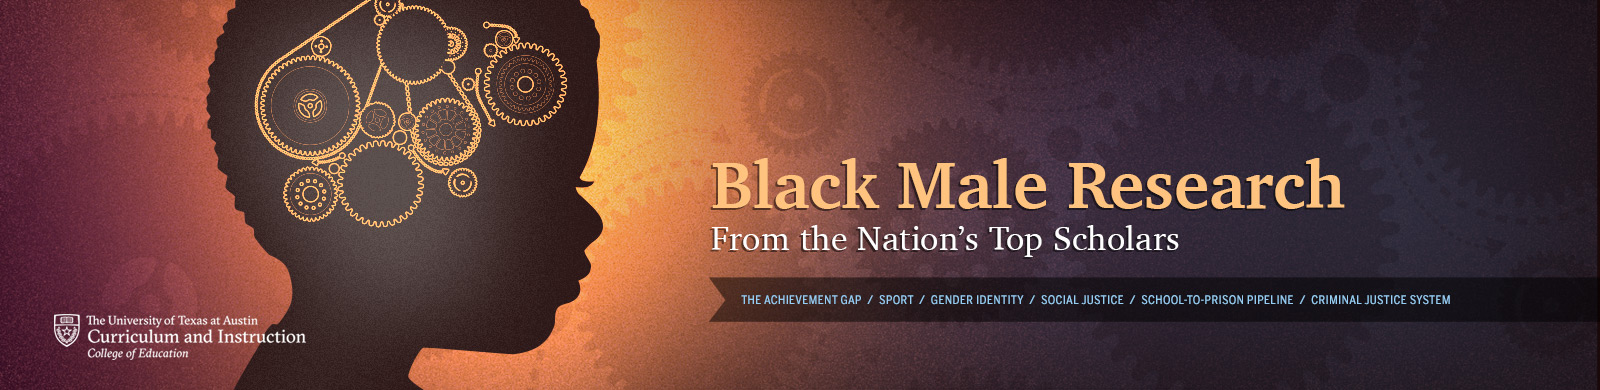 Black Male Research from the Nation's Top Scholars